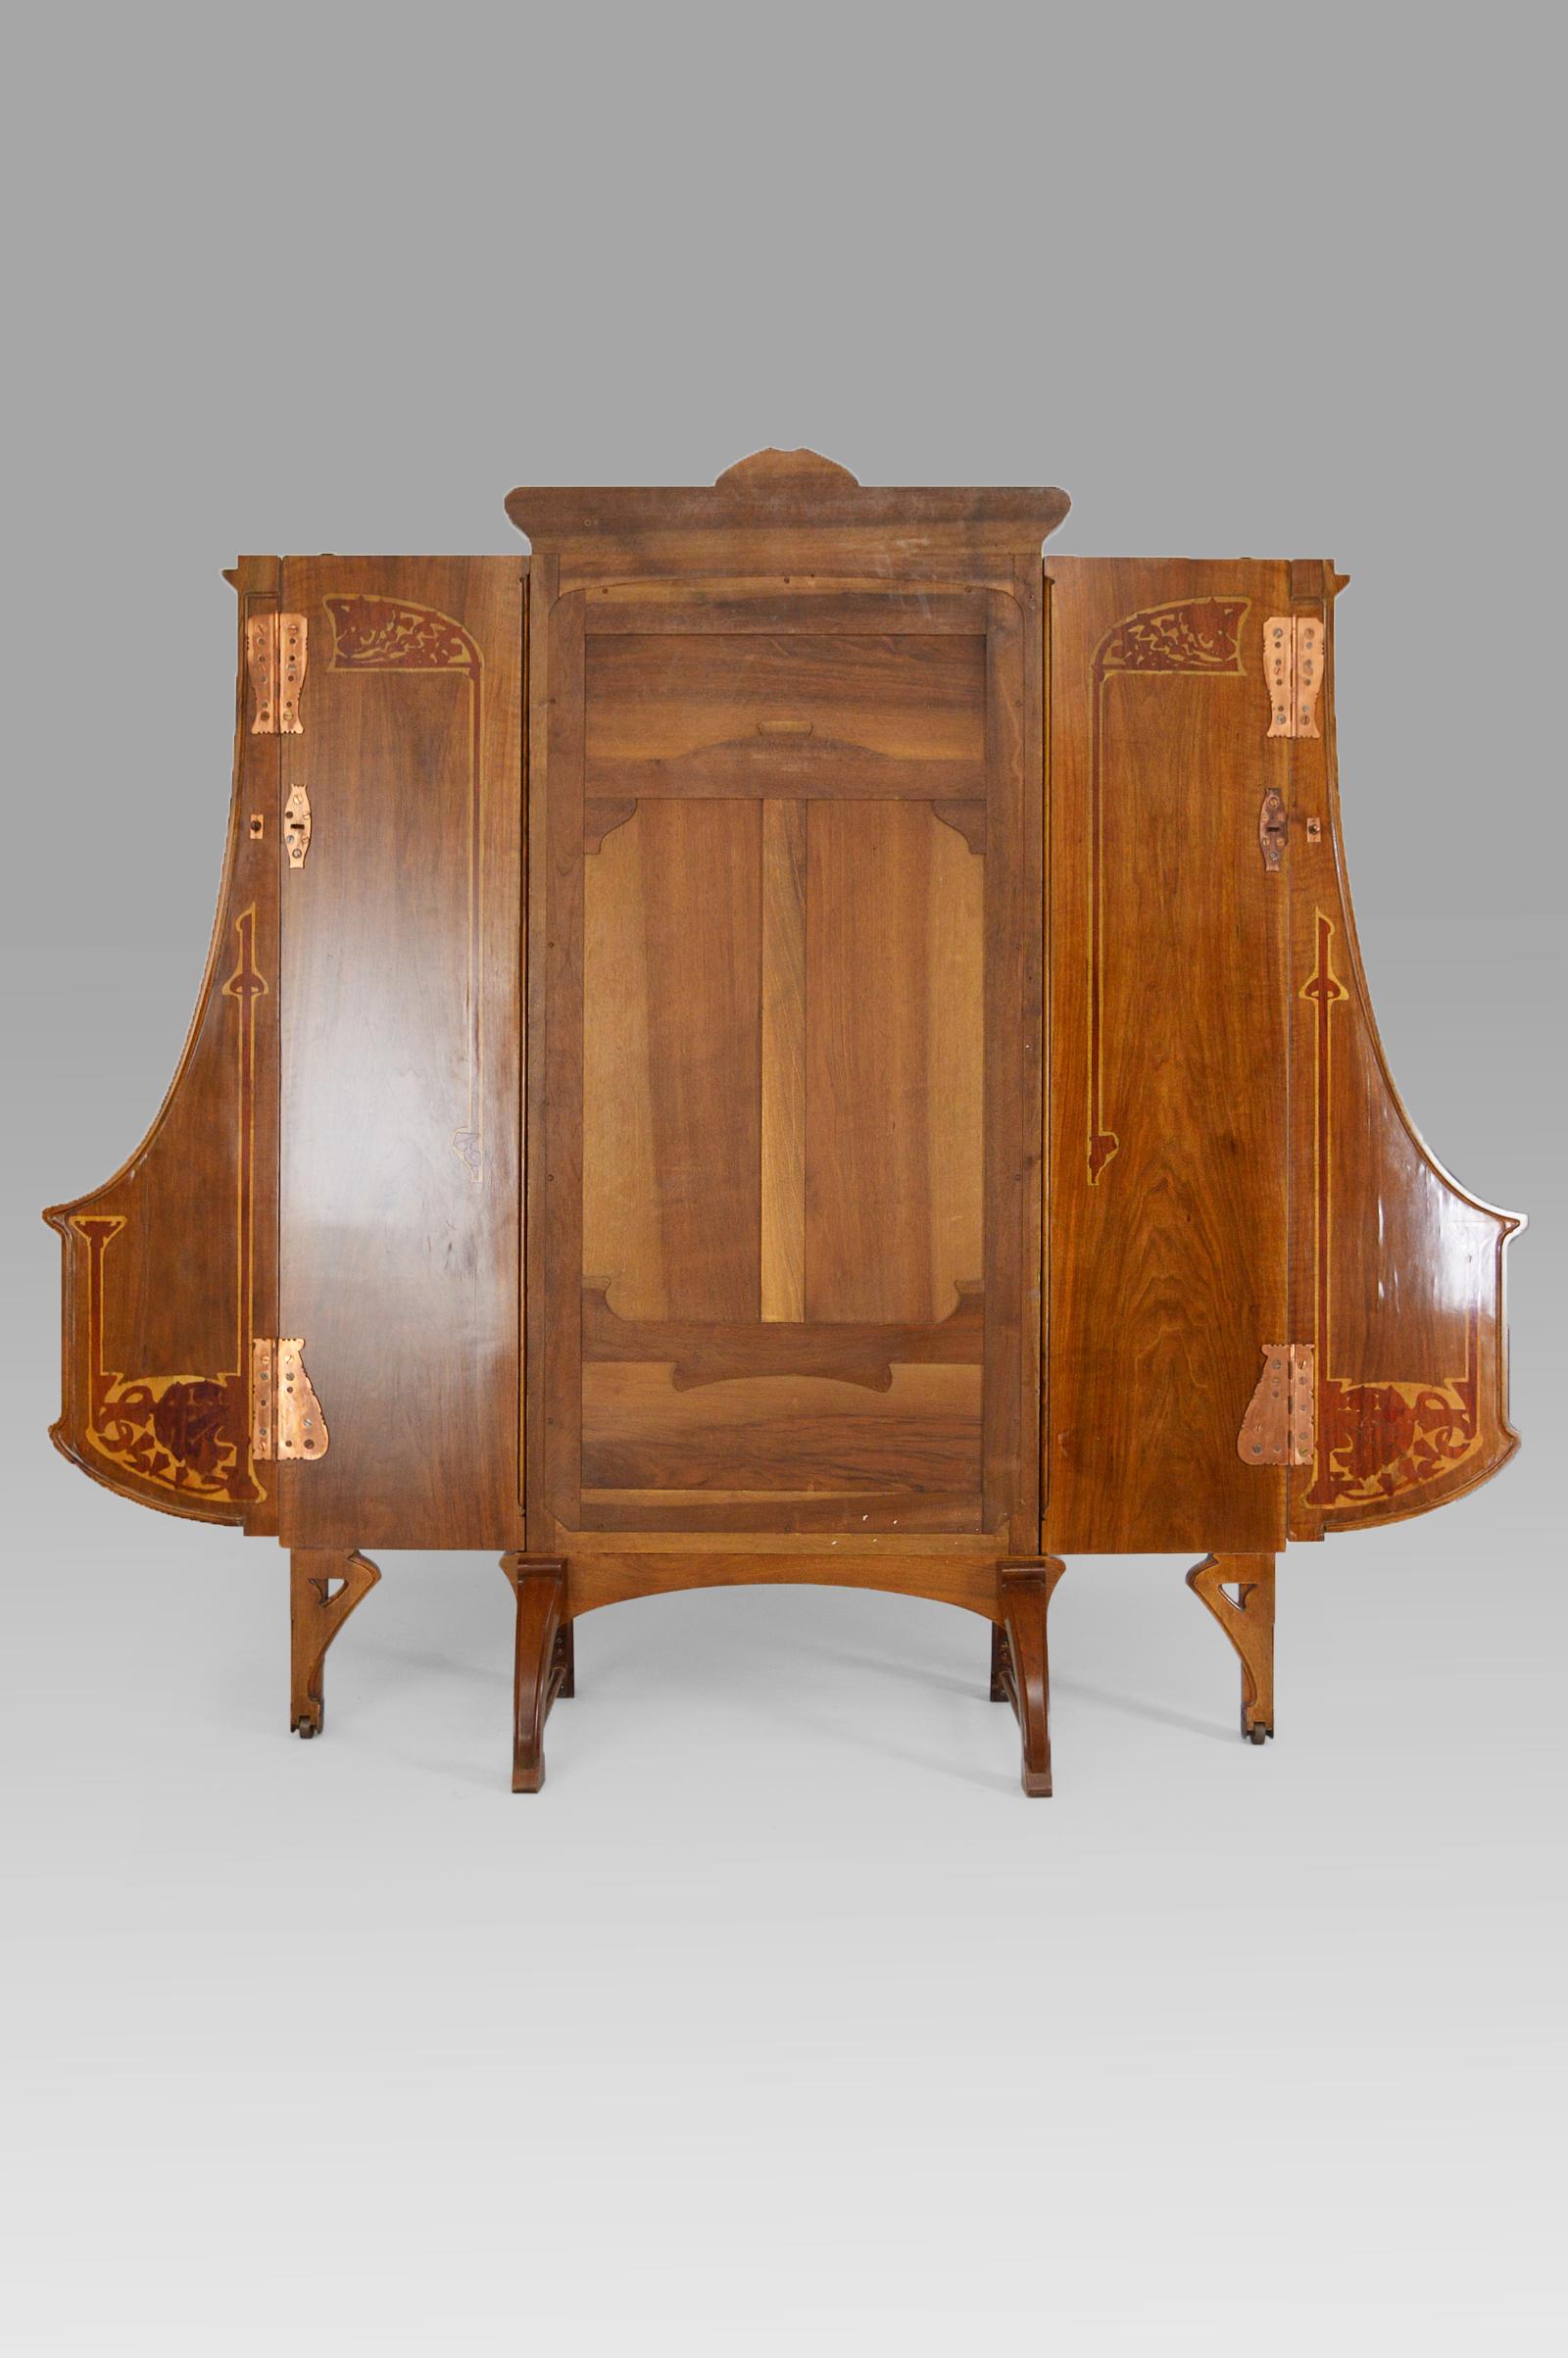 French Art Nouveau Cheval Mirror 5-Panel Screen / Vanity Dressing Table, 1901 For Sale 4